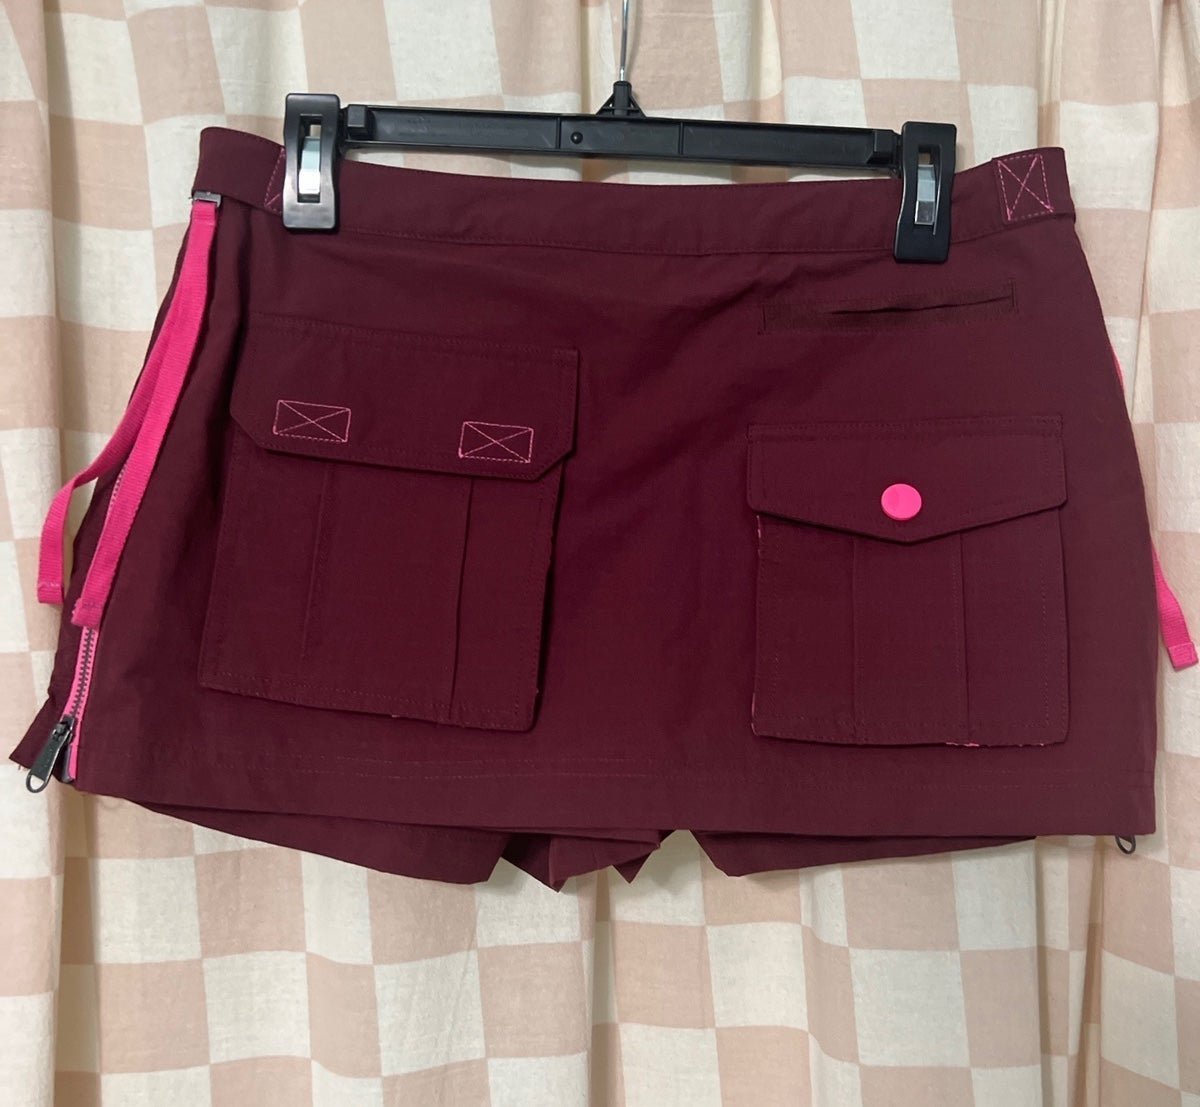 cheapest place to buy  NWOT Free People Great Outdoors Skort LIjR2phkB online store